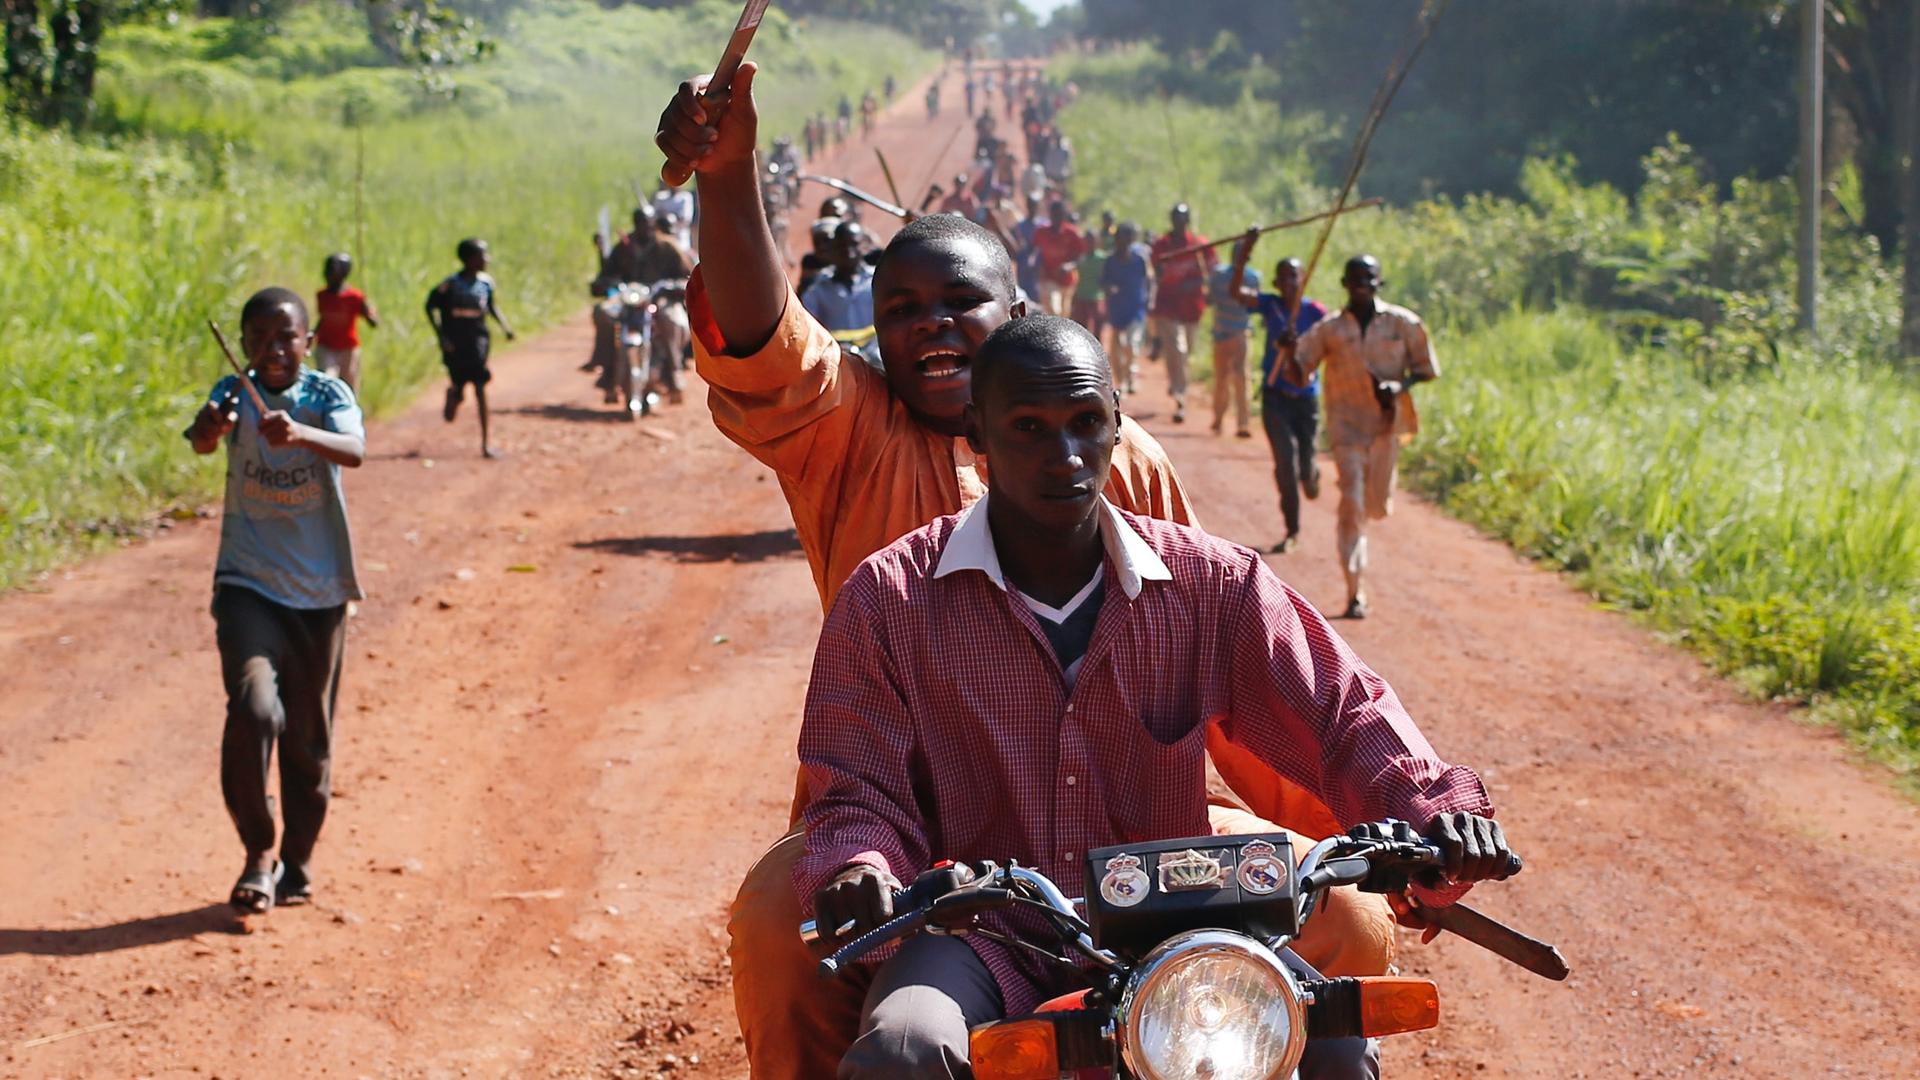 A man waves a machete in the air as he rides on the back of a motorcycle amid other protesters on foot on a long, dirt road. 